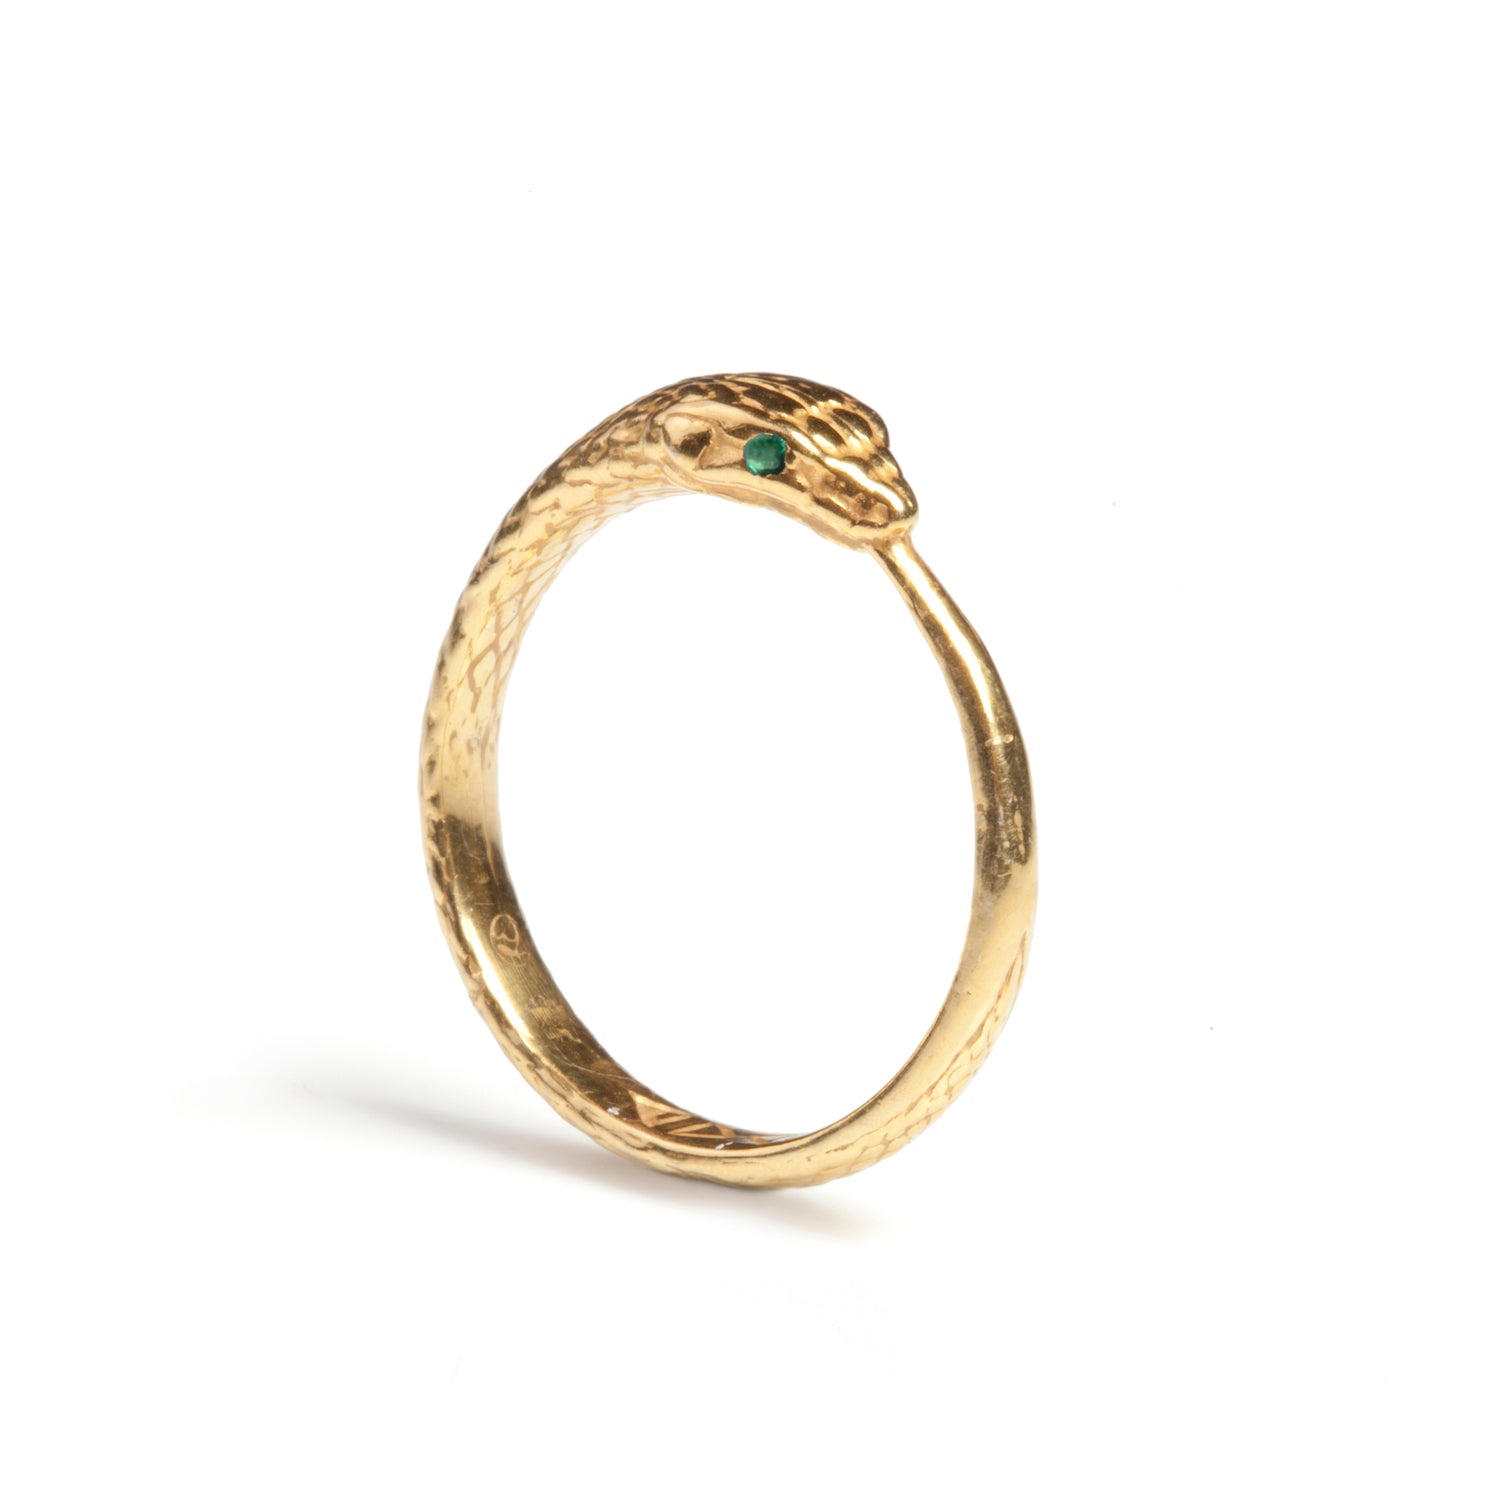 Rachel Entwistle Ouroboros Snake Ring Limited Edition With Emeralds - P / Gold Vermeil